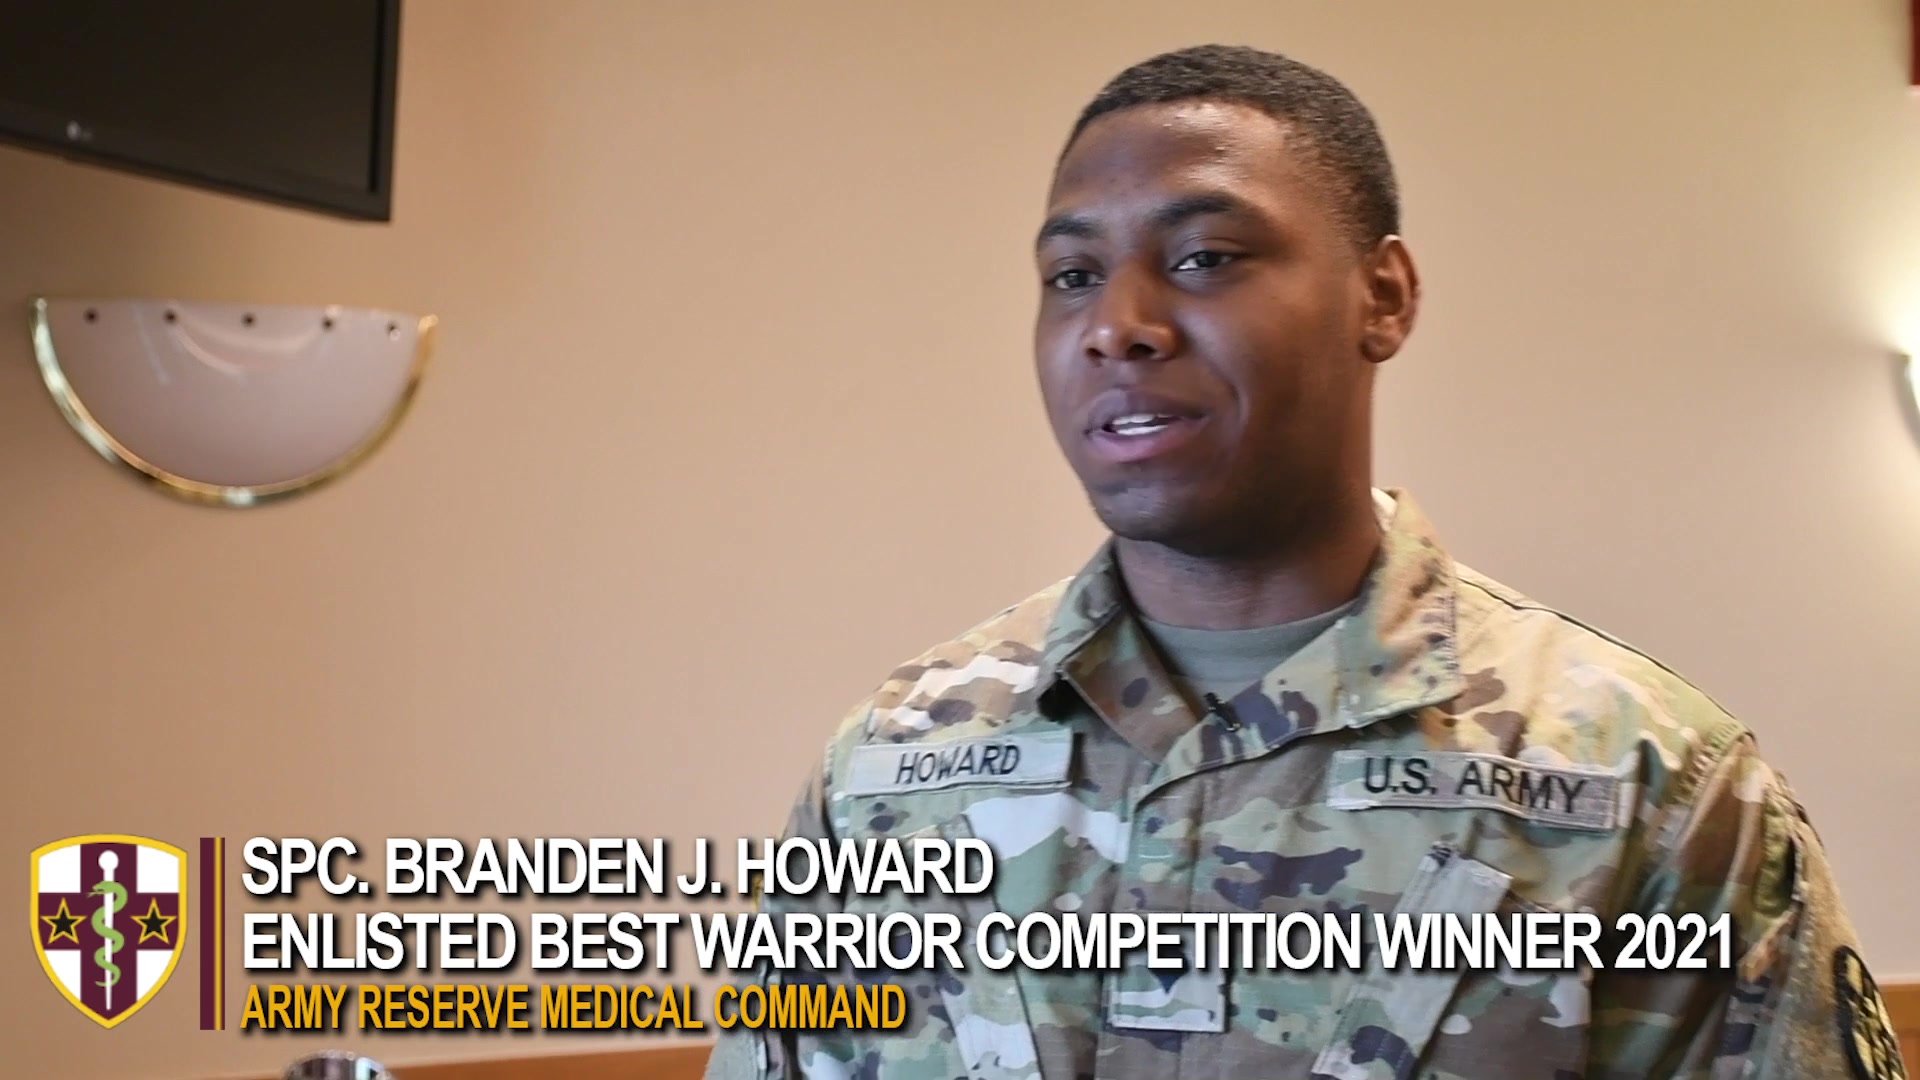 Spc. Branden Howard, an Army Reserve dental assistant from East St. Louis, Illinois, shares his thoughts about what the Best Warrior Competition means to him.